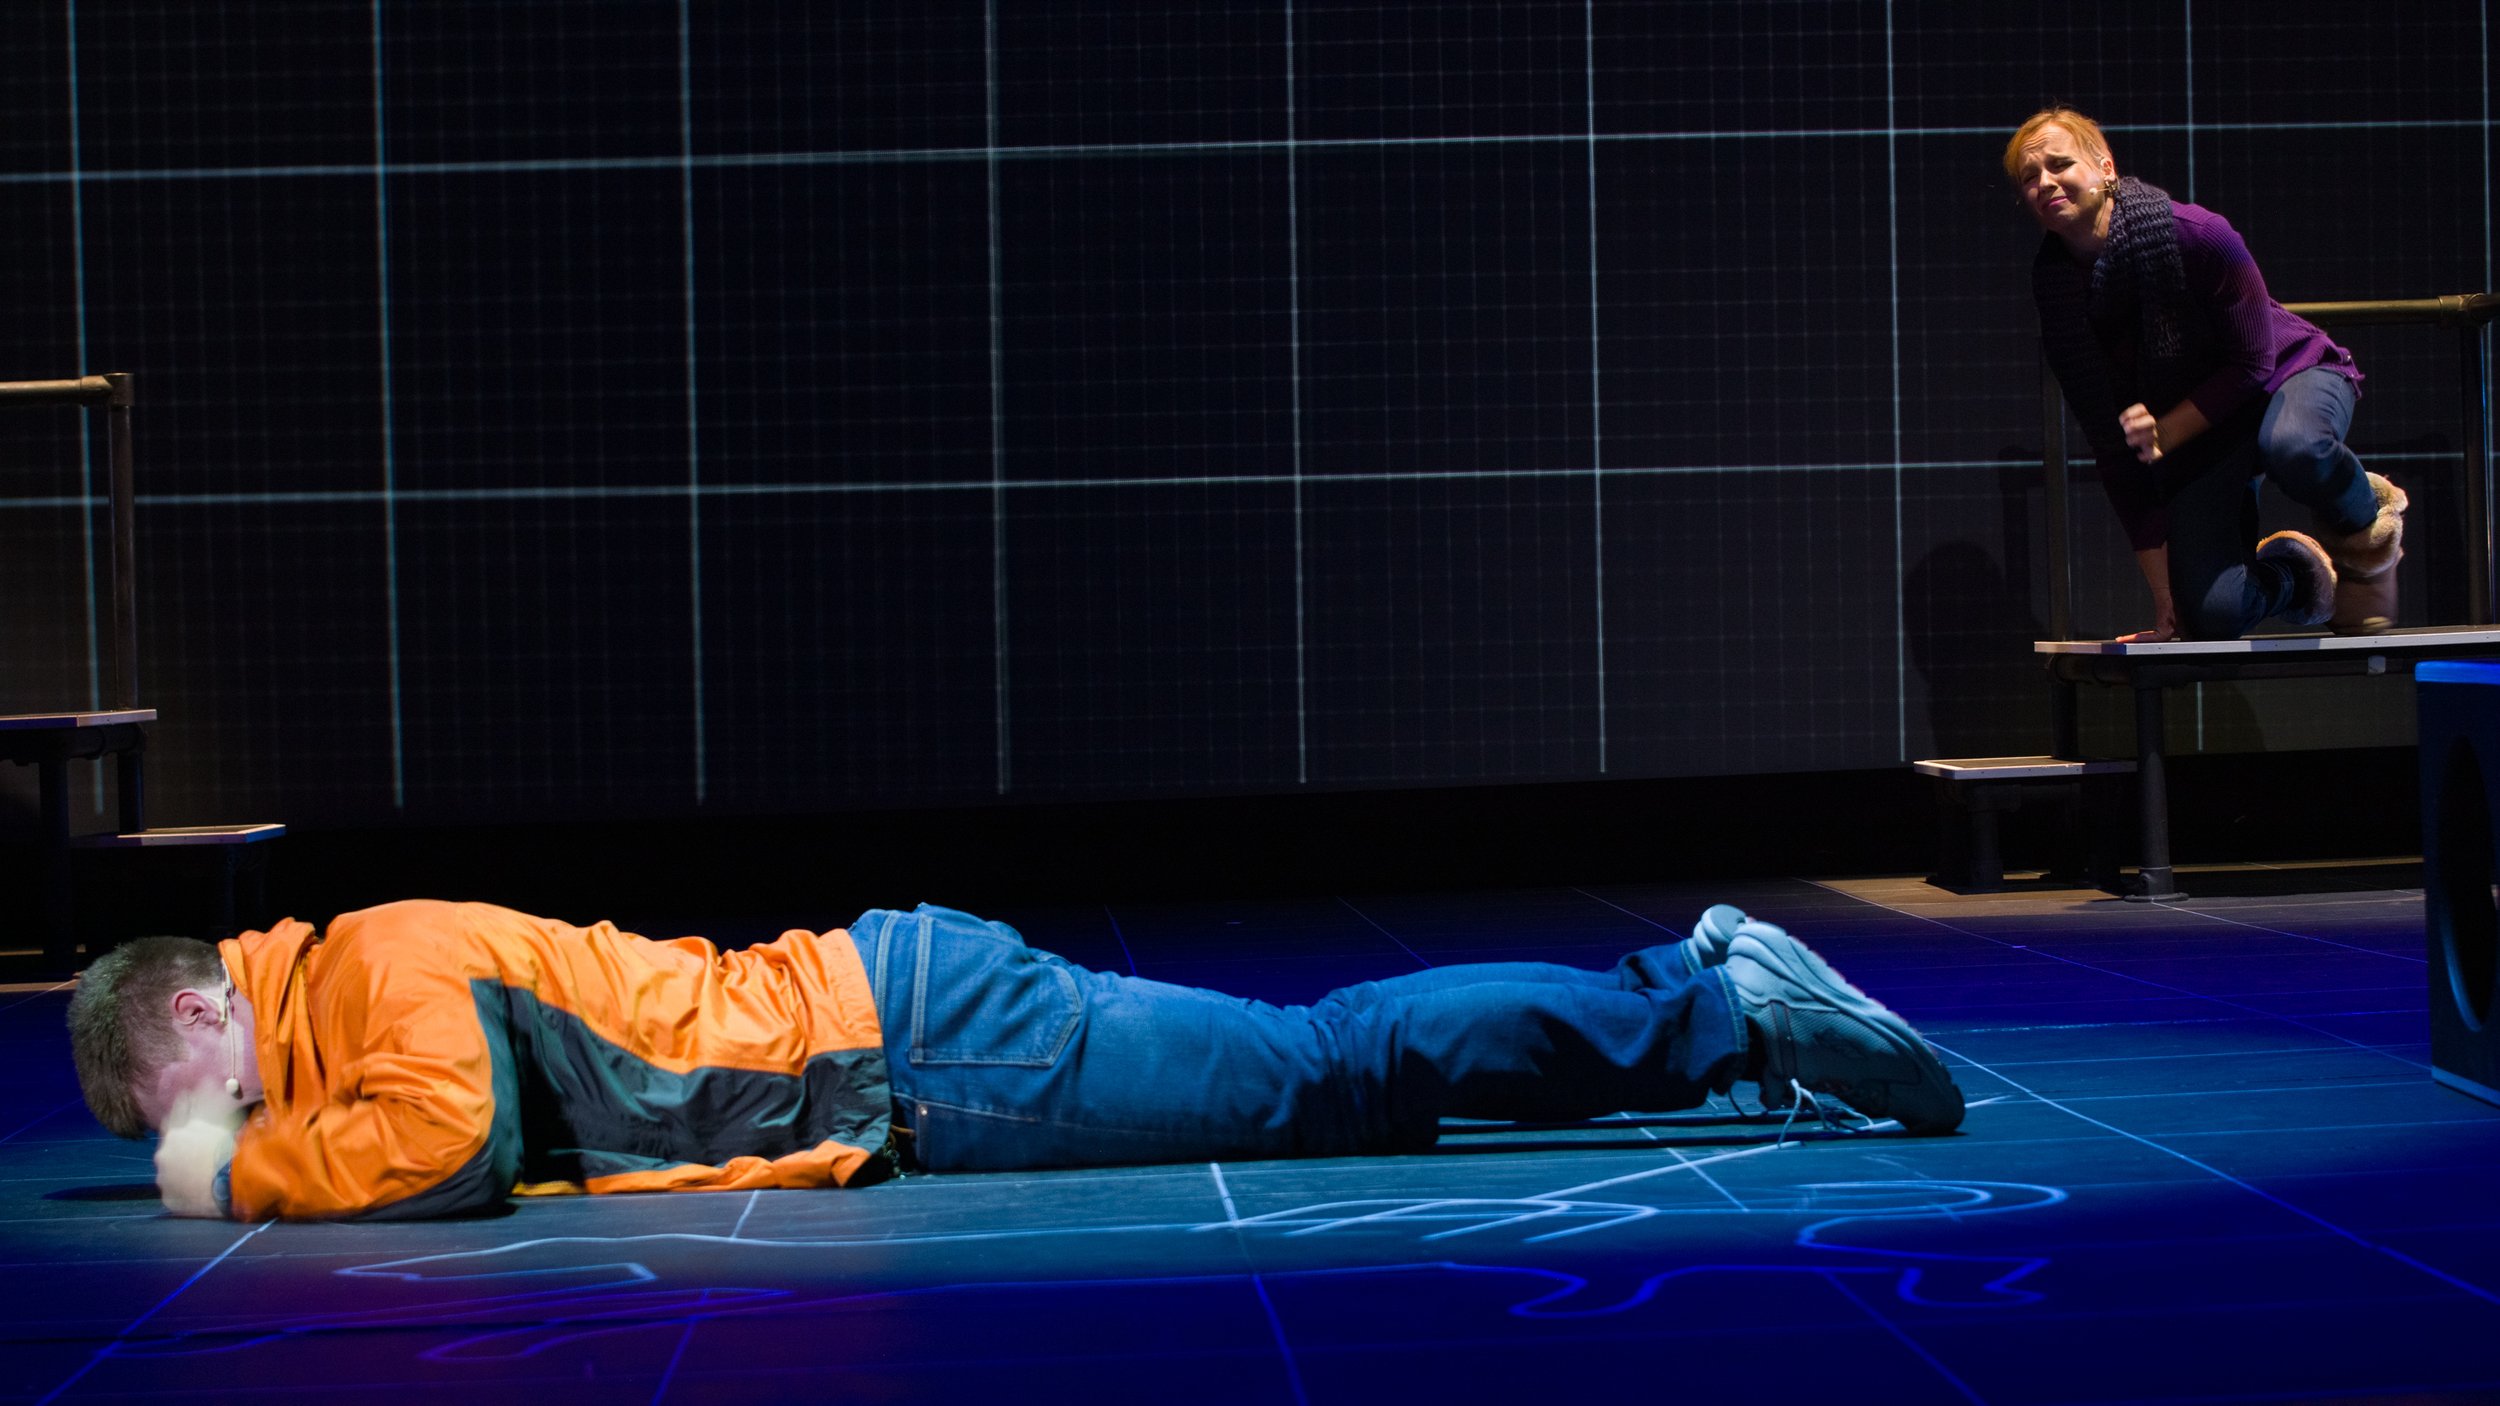  Justin Valine (center) and Megan Winberg (right) during last dress rehearsal before the first showing of "The Curious Incident of The Dog in The Night-Time" on Thursday, October 7th at Santa Monica College, Santa Monica, Calif. 